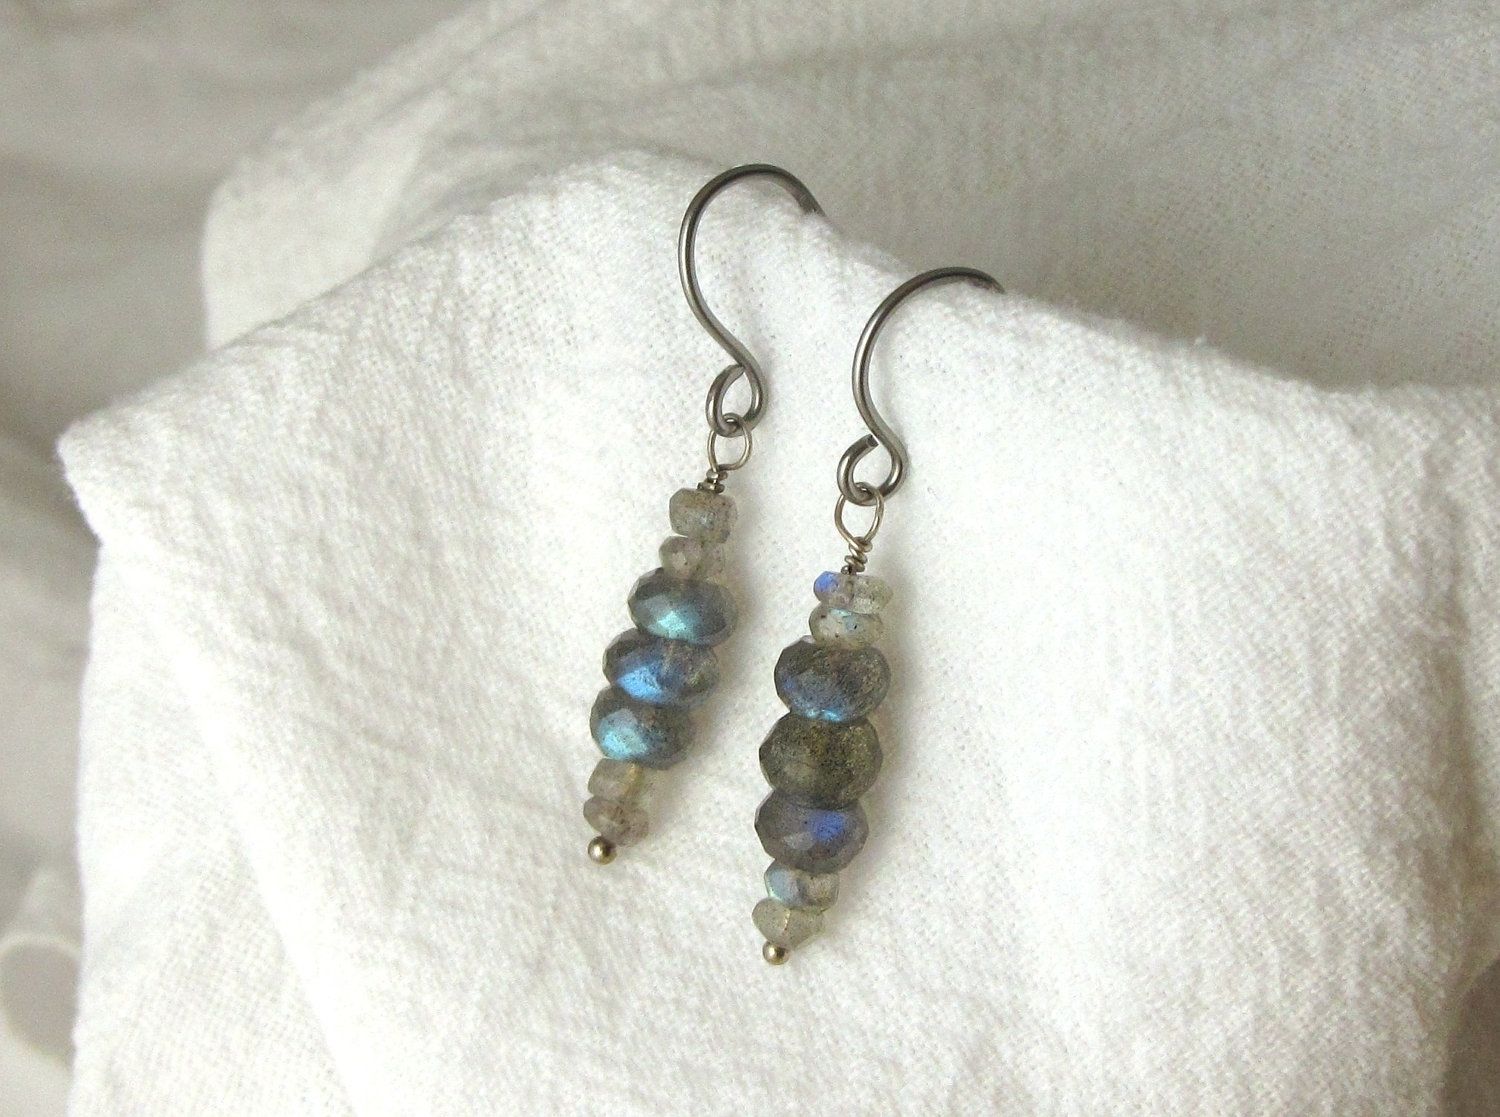 Buy a Hand Crafted Labradorite Earrings, Dangle, Hypoallergenic, Stack ...